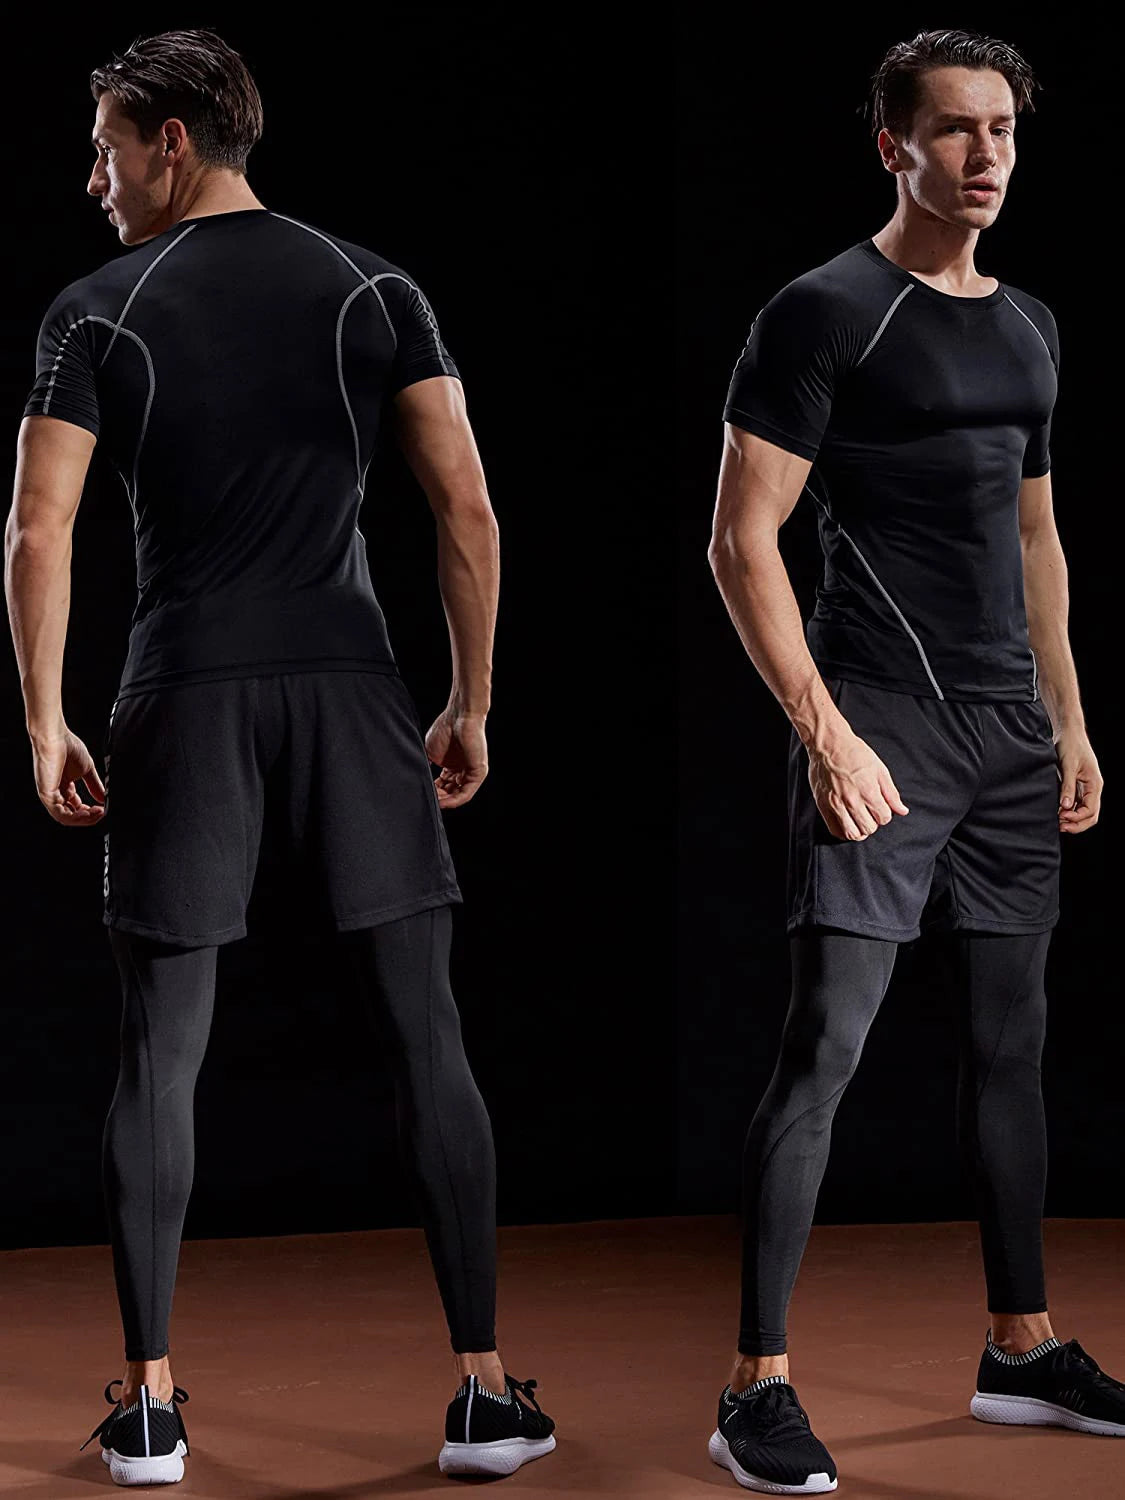 Top Quality Men's  Sportswear Elastic Compression Dri-FIT Breathable T-Shirt  for All Training Needs